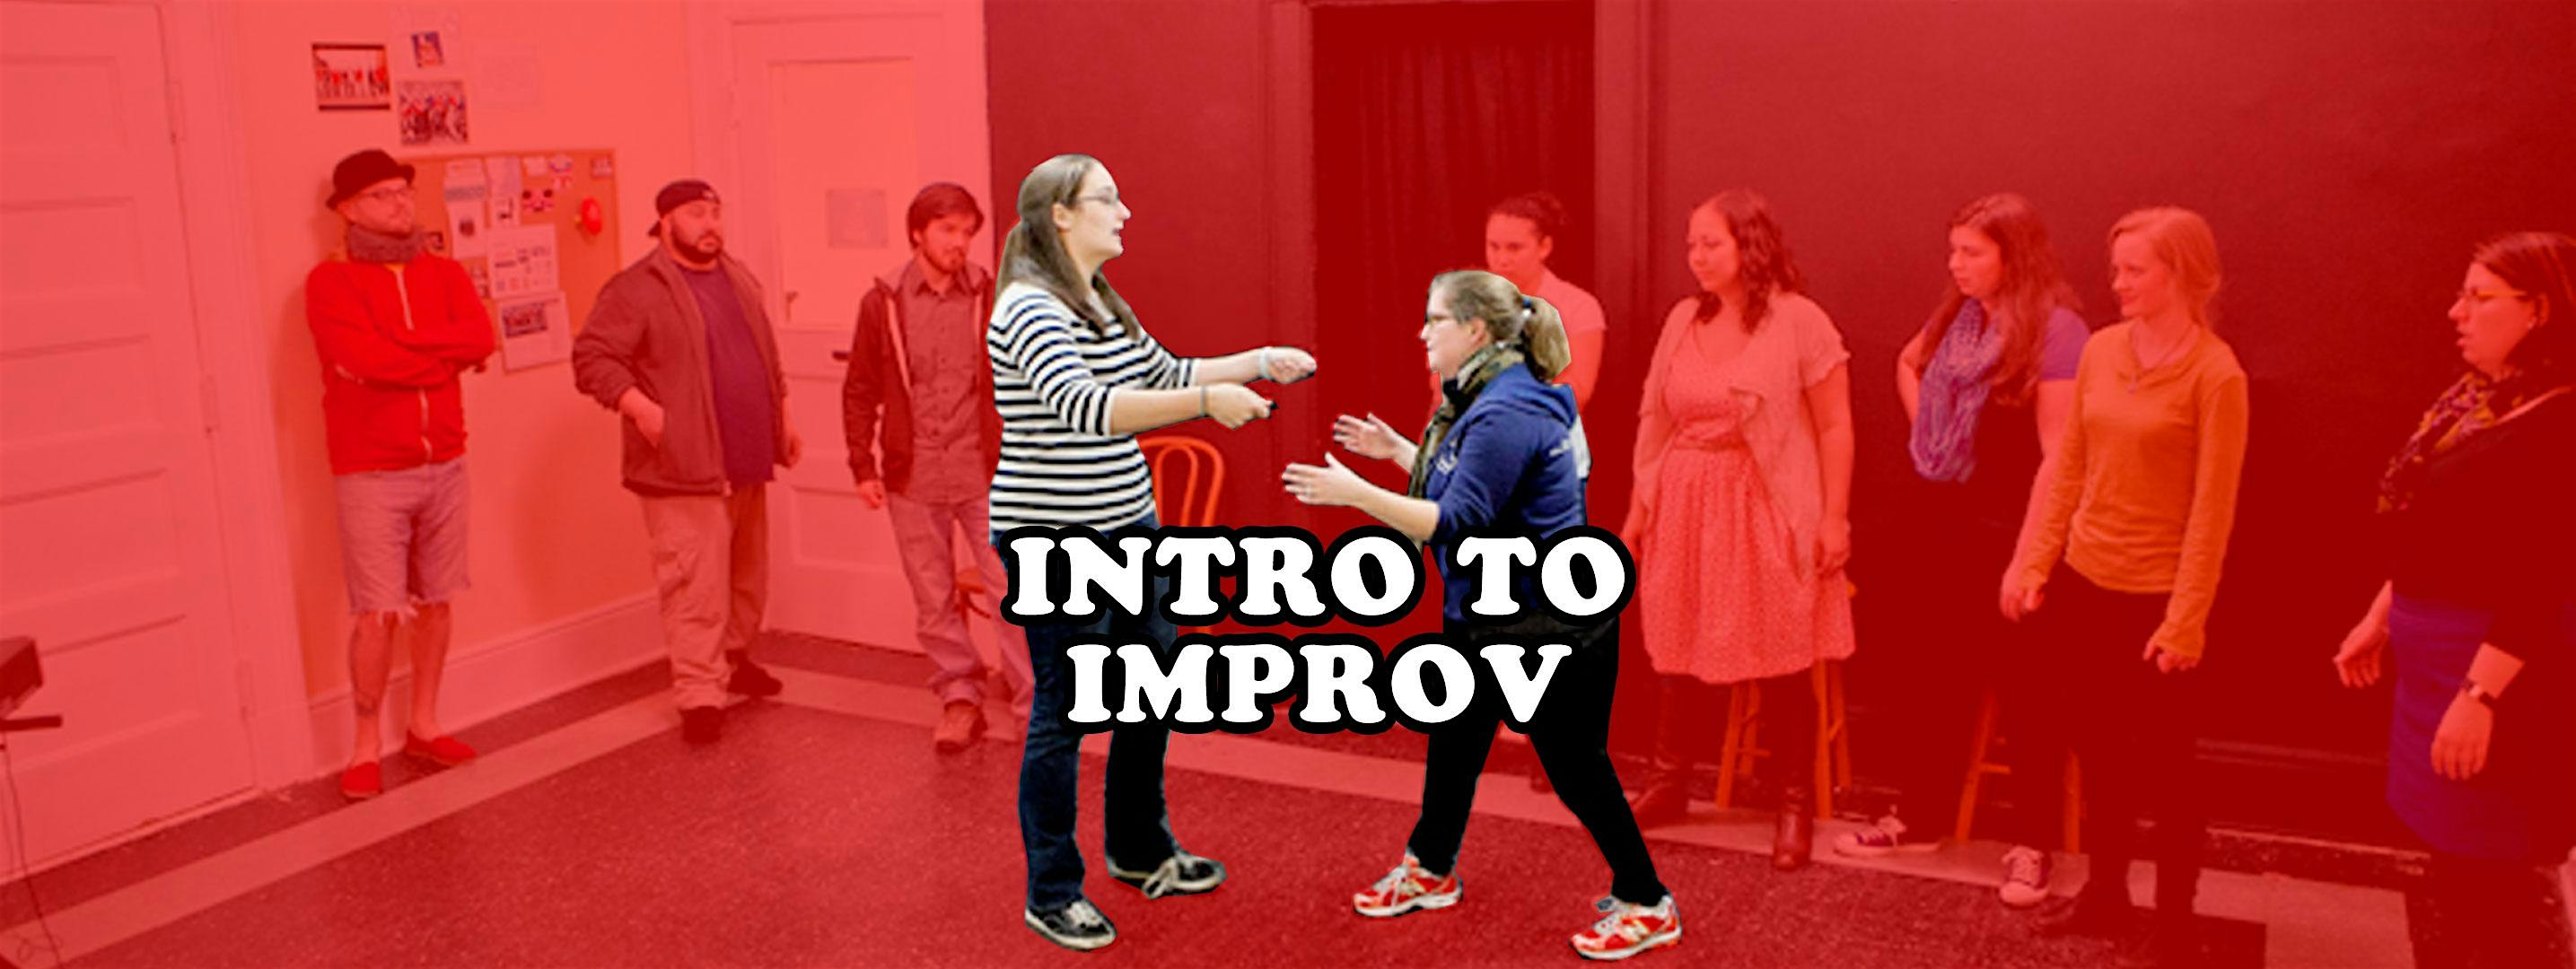 Intro to Improv - 4-week Comedy Course for Beginners